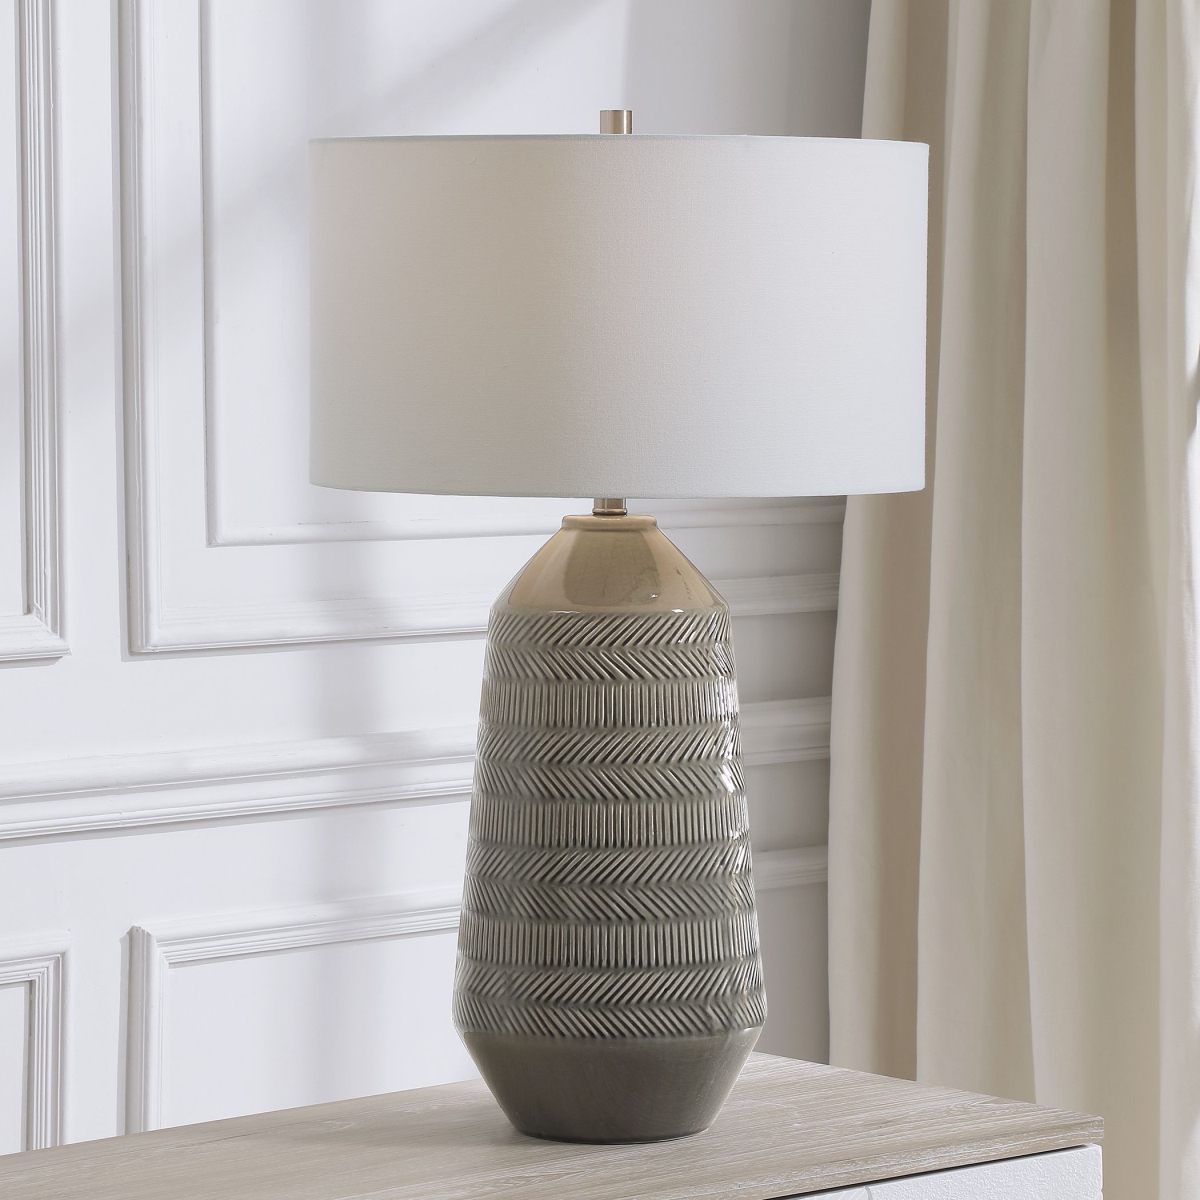 Picture of 212 Main 28375 Rewind Gray Table Lamp  28 x 13 x 13 in.